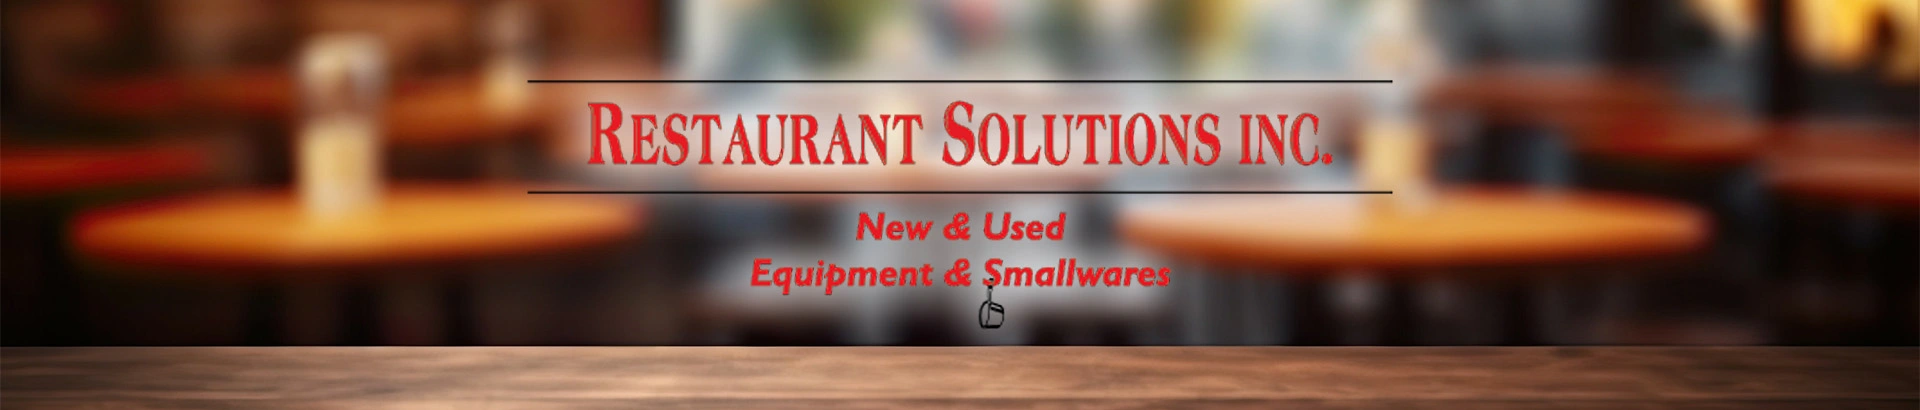 Banner image with logo for Restaurant Solutions Inc